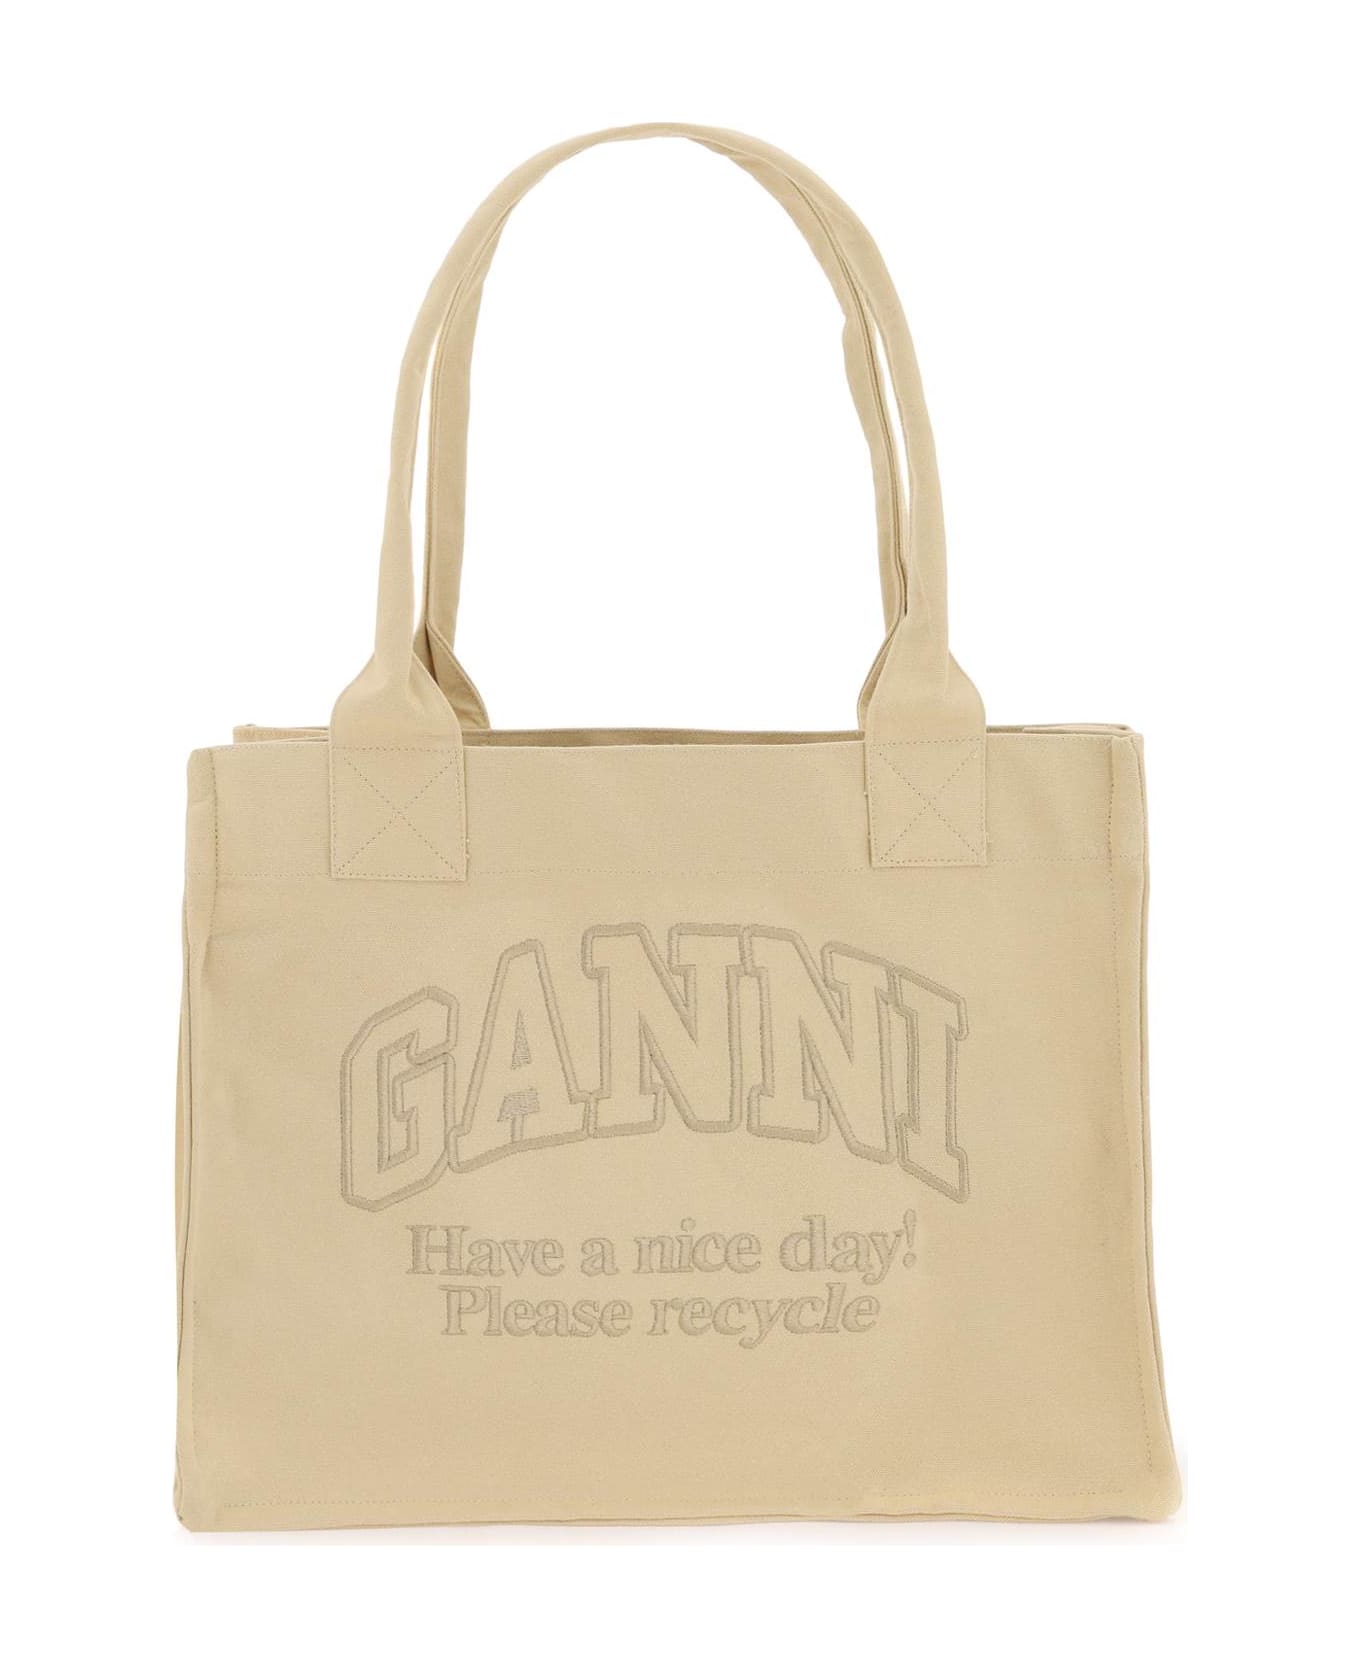 Ganni Tote Bag With Embroidery - BUTTERCREAM (Beige) トートバッグ